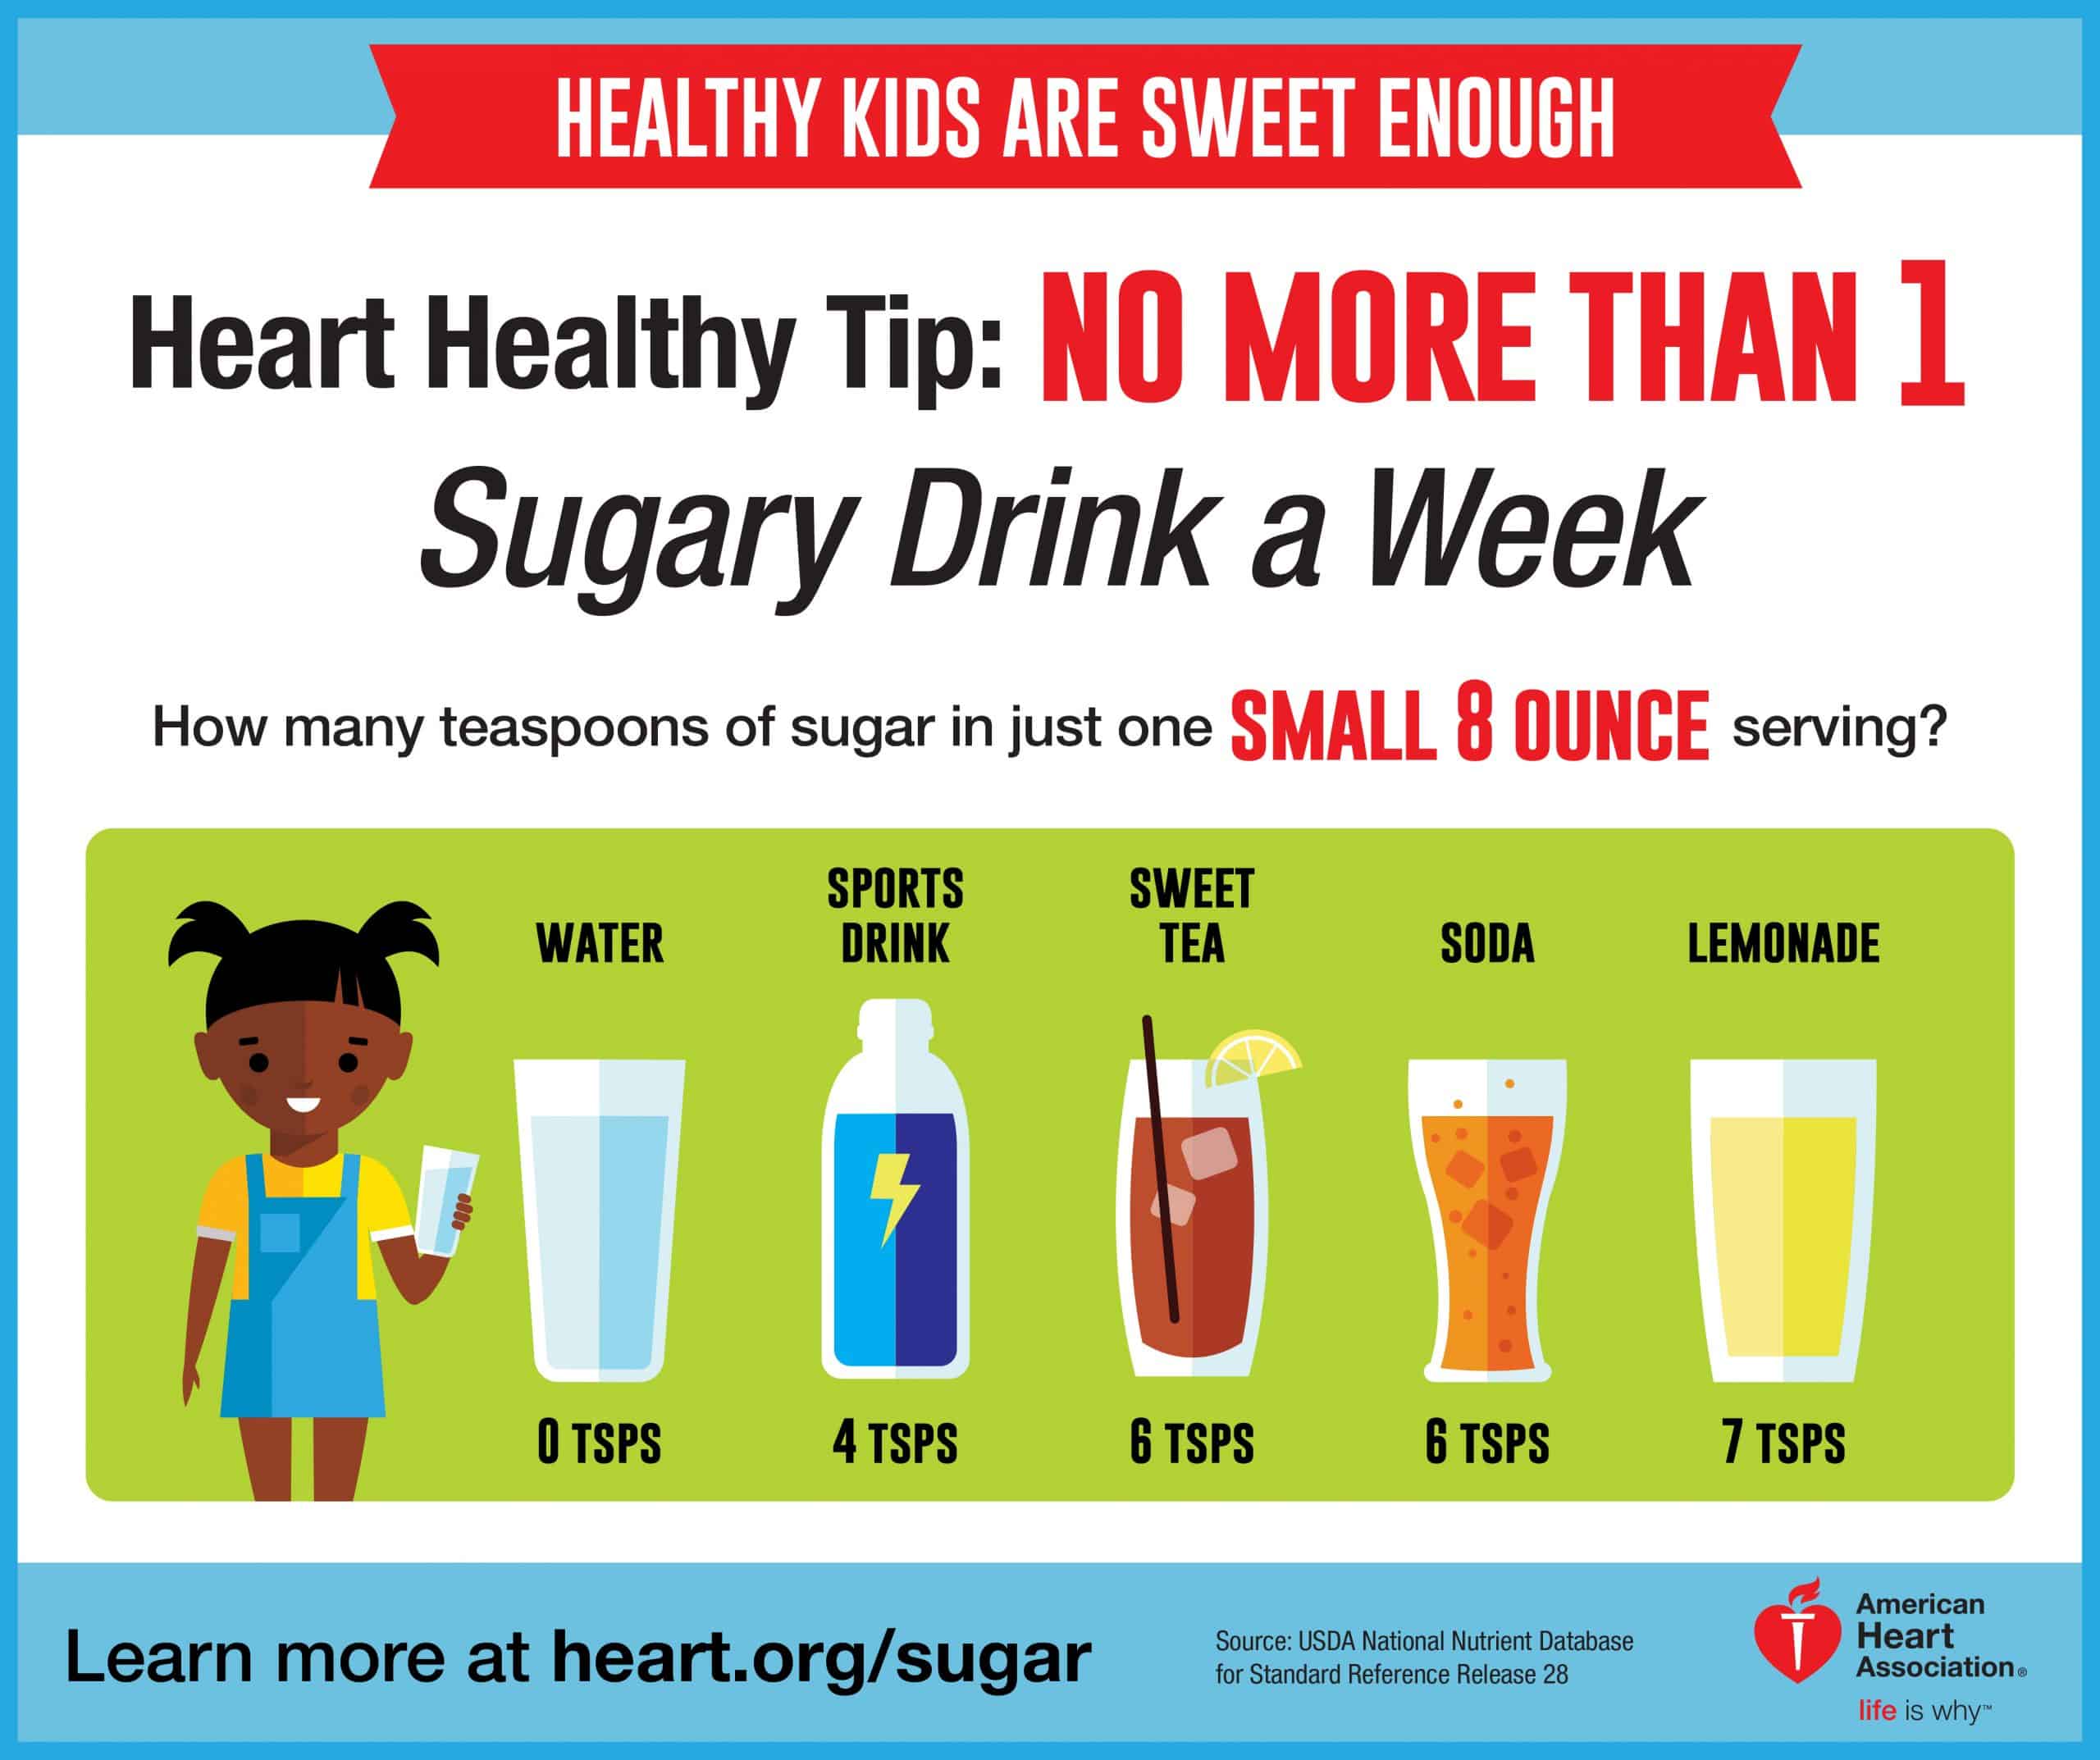 Thank Before You Drink: The Scoop on Sugar &  Sweetened Beverages